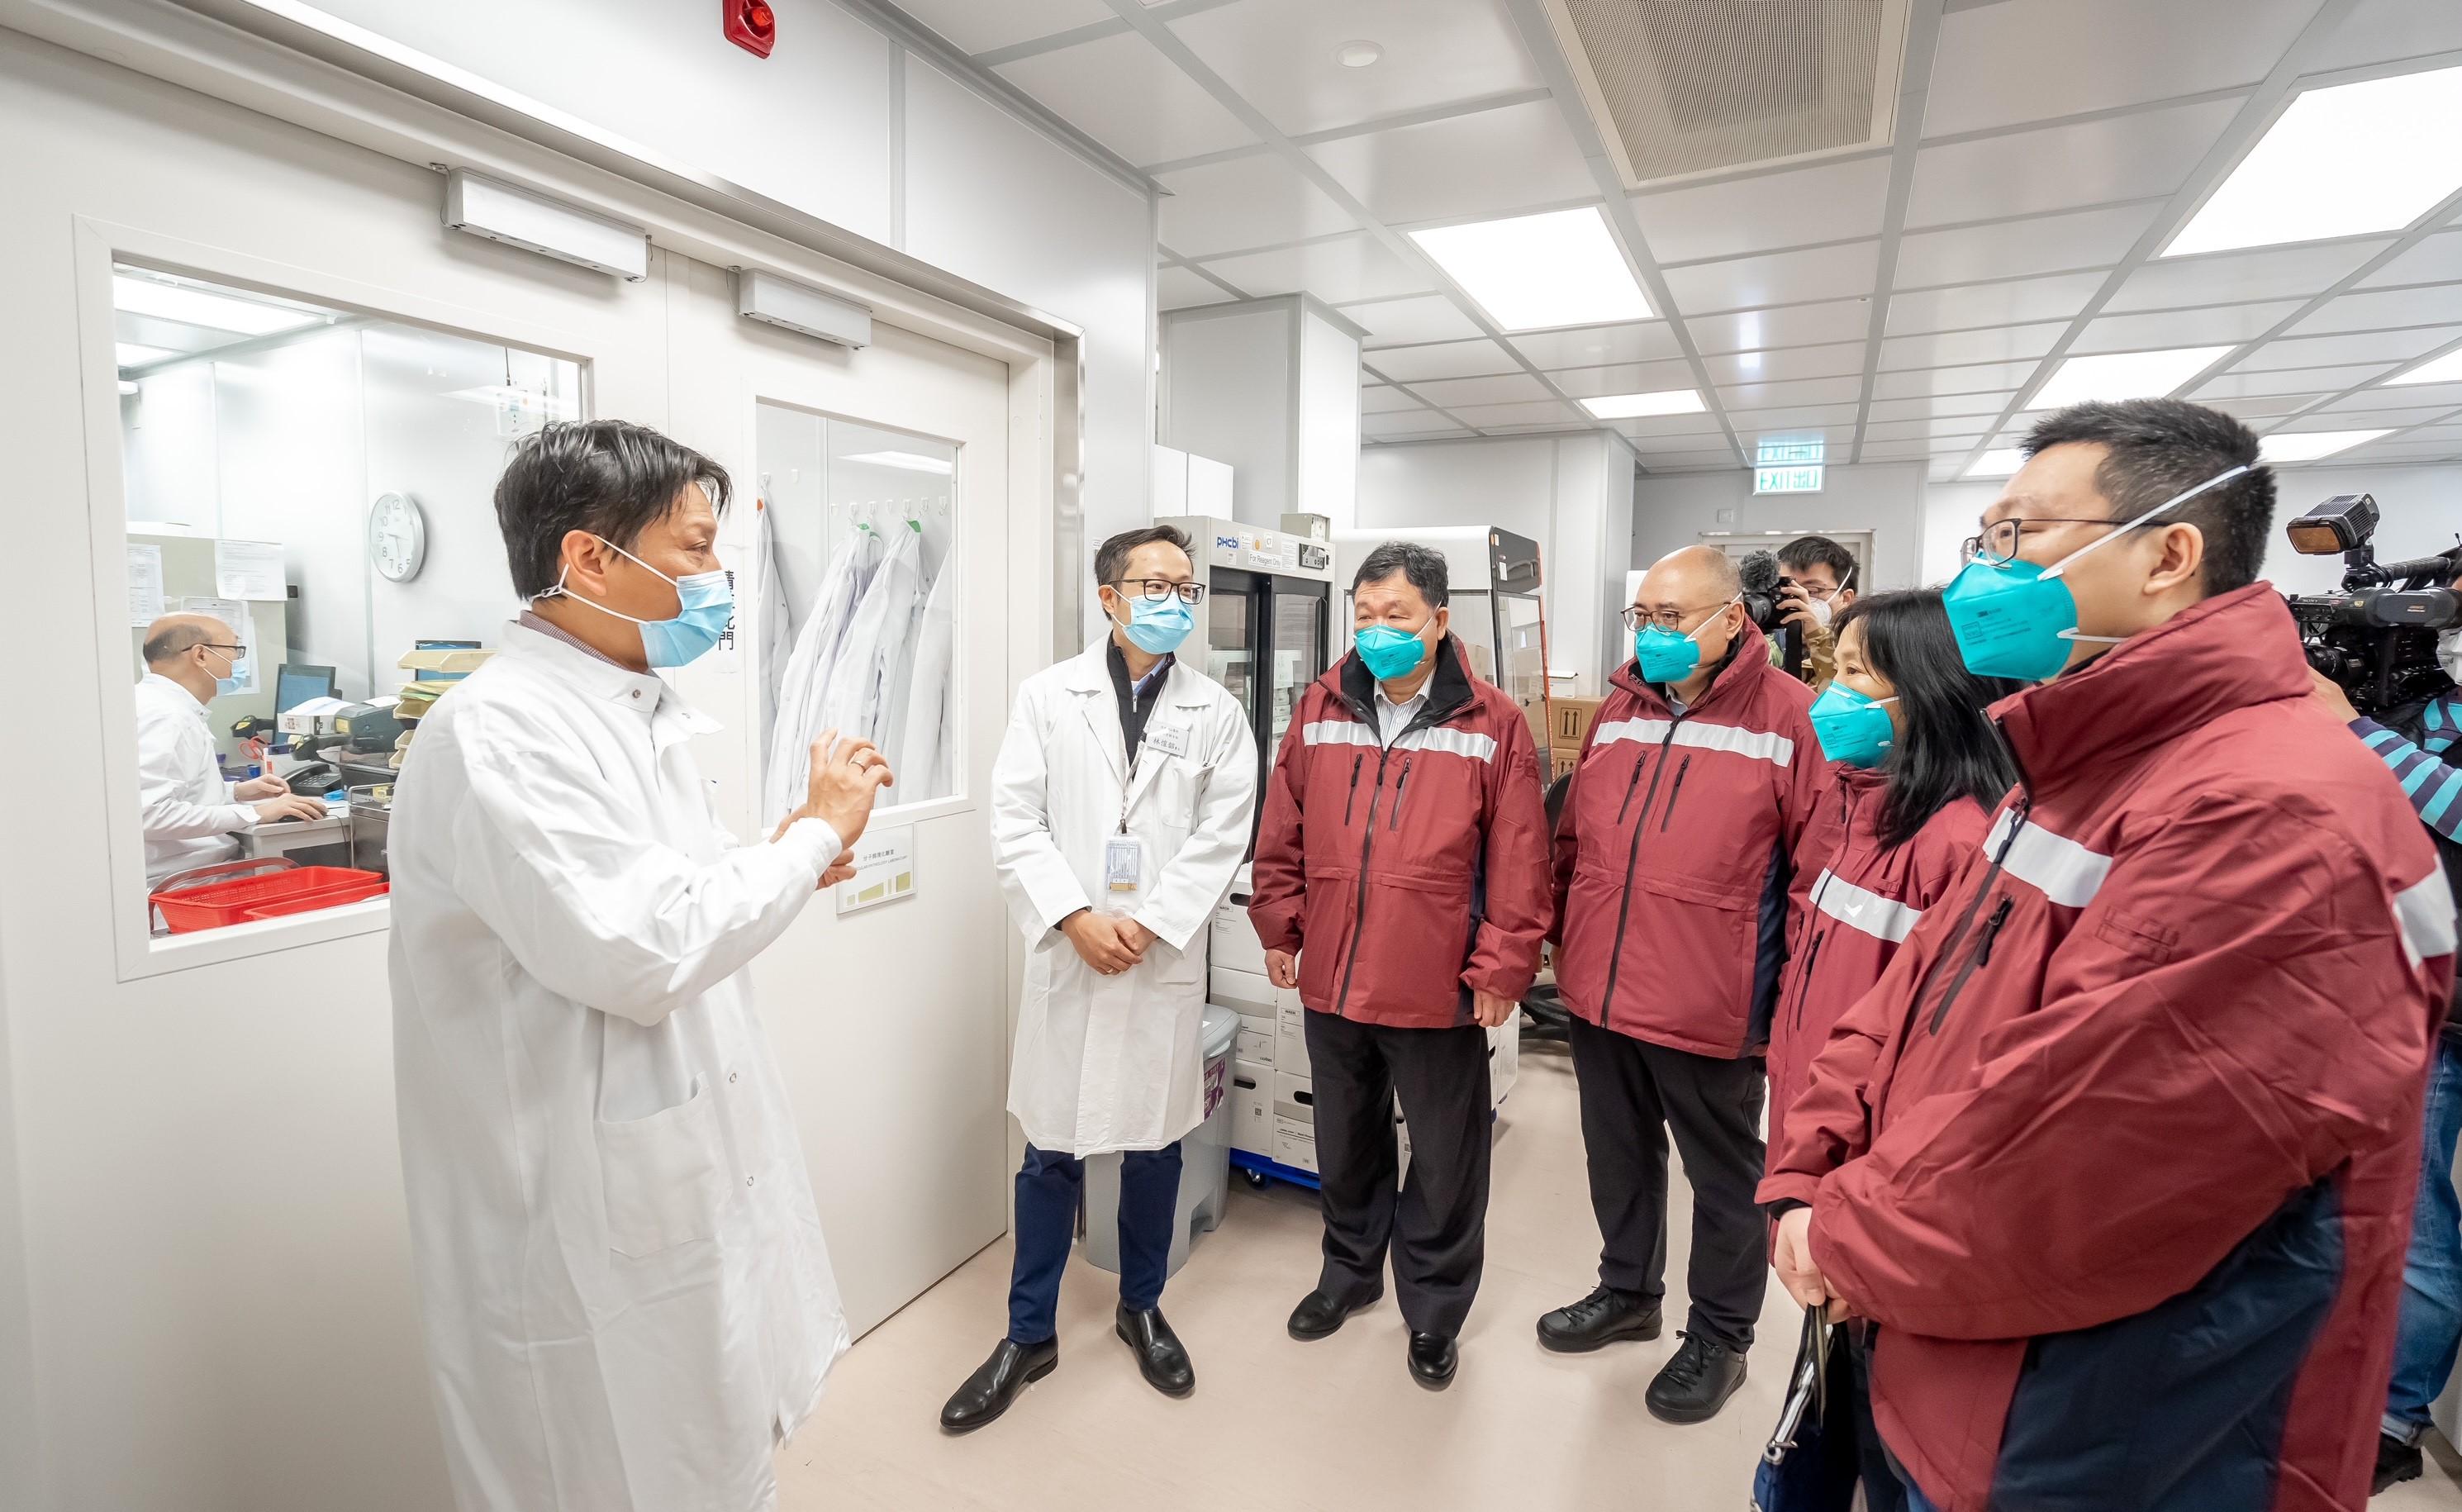 The laboratory team of the North Lantau Hospital Hong Kong Infection Control Centre introduces the operation and testing capacity to the visiting Mainland COVID-19 medical expert delegation today (February 22).